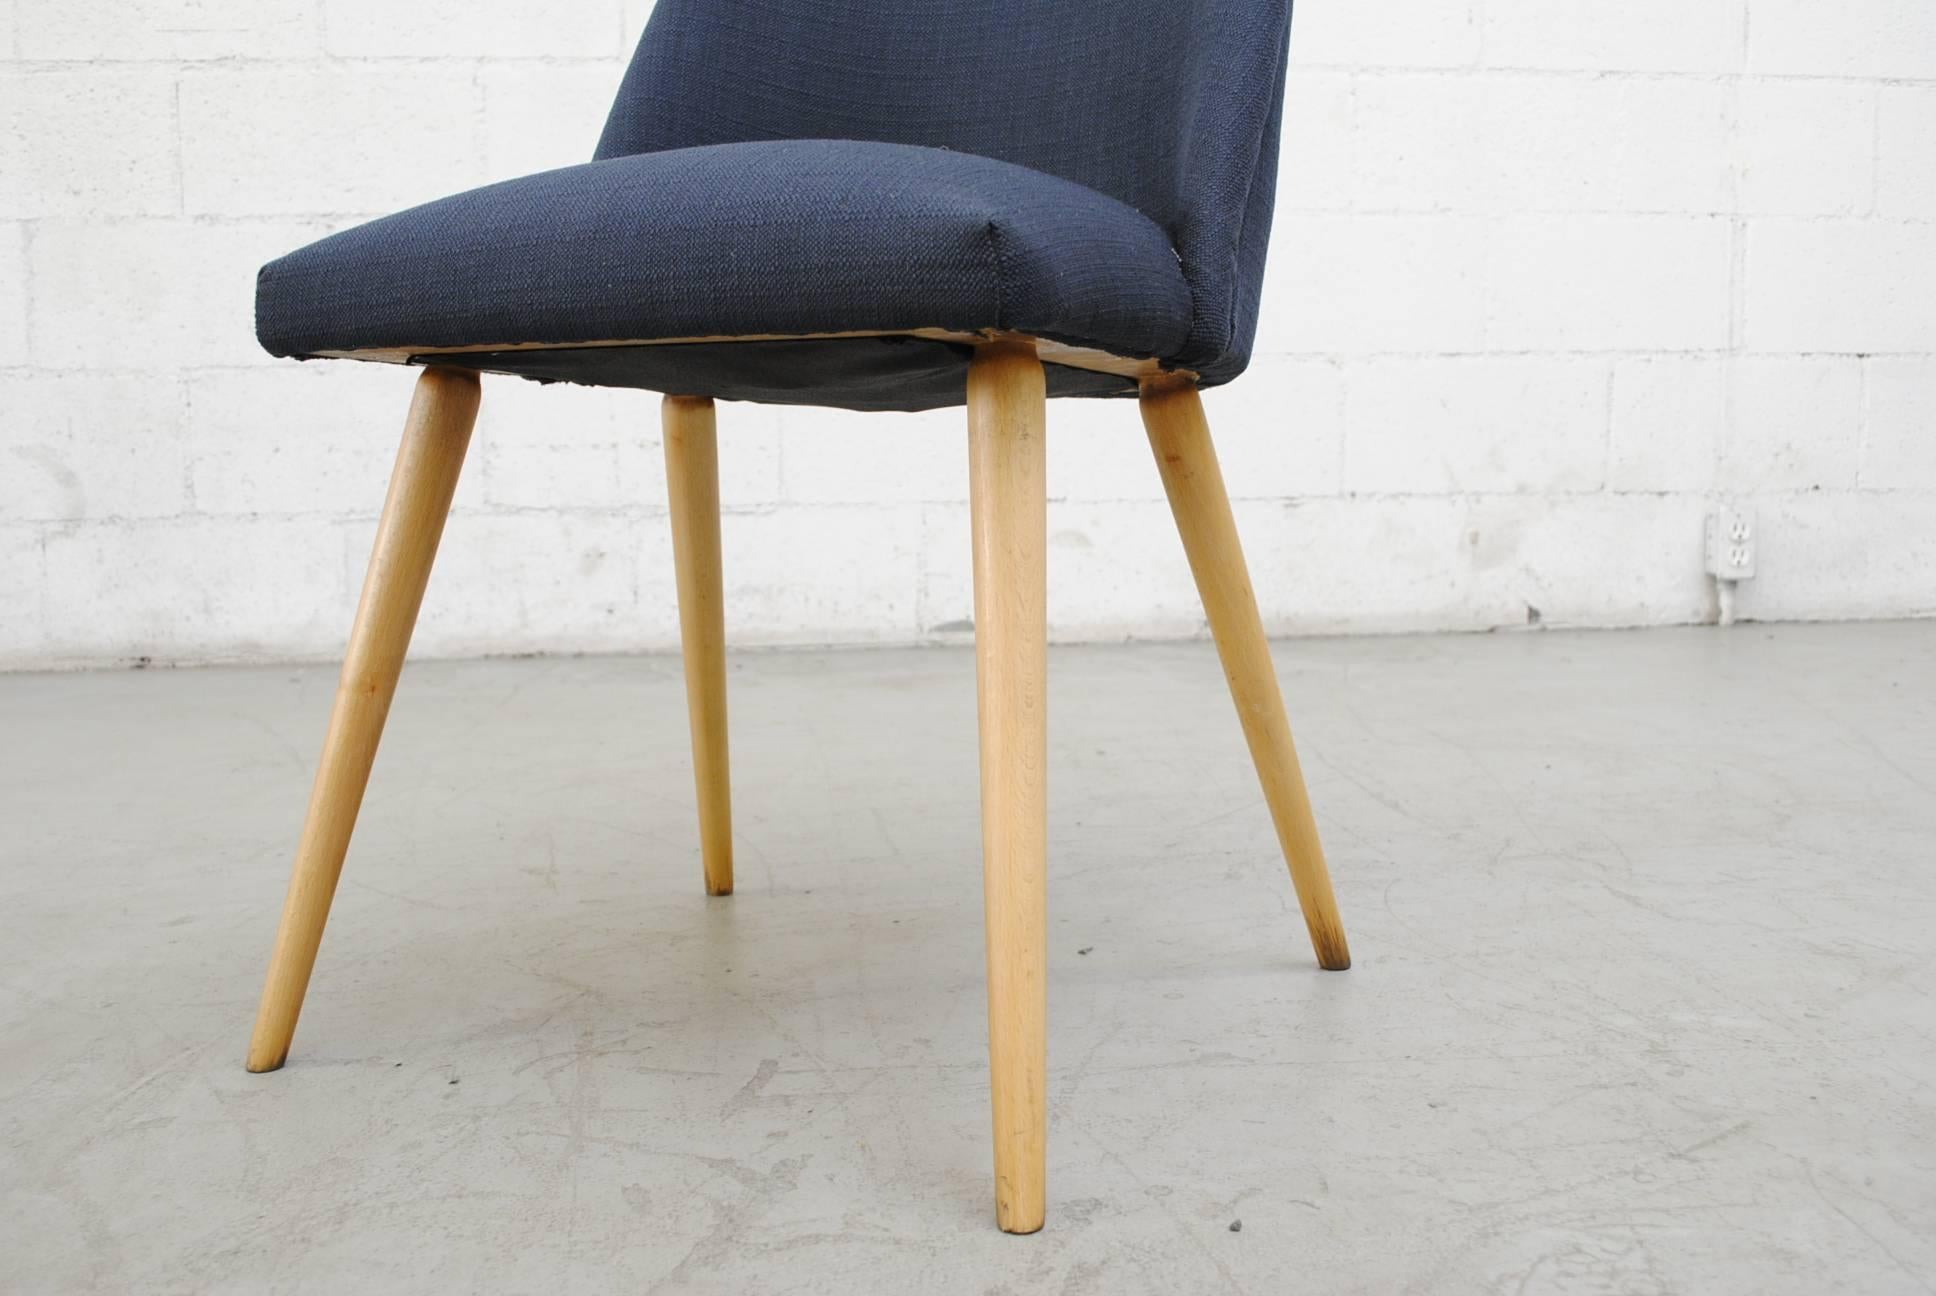 Saarinen Style Dining Chairs in Navy with Birch Legs For Sale 2